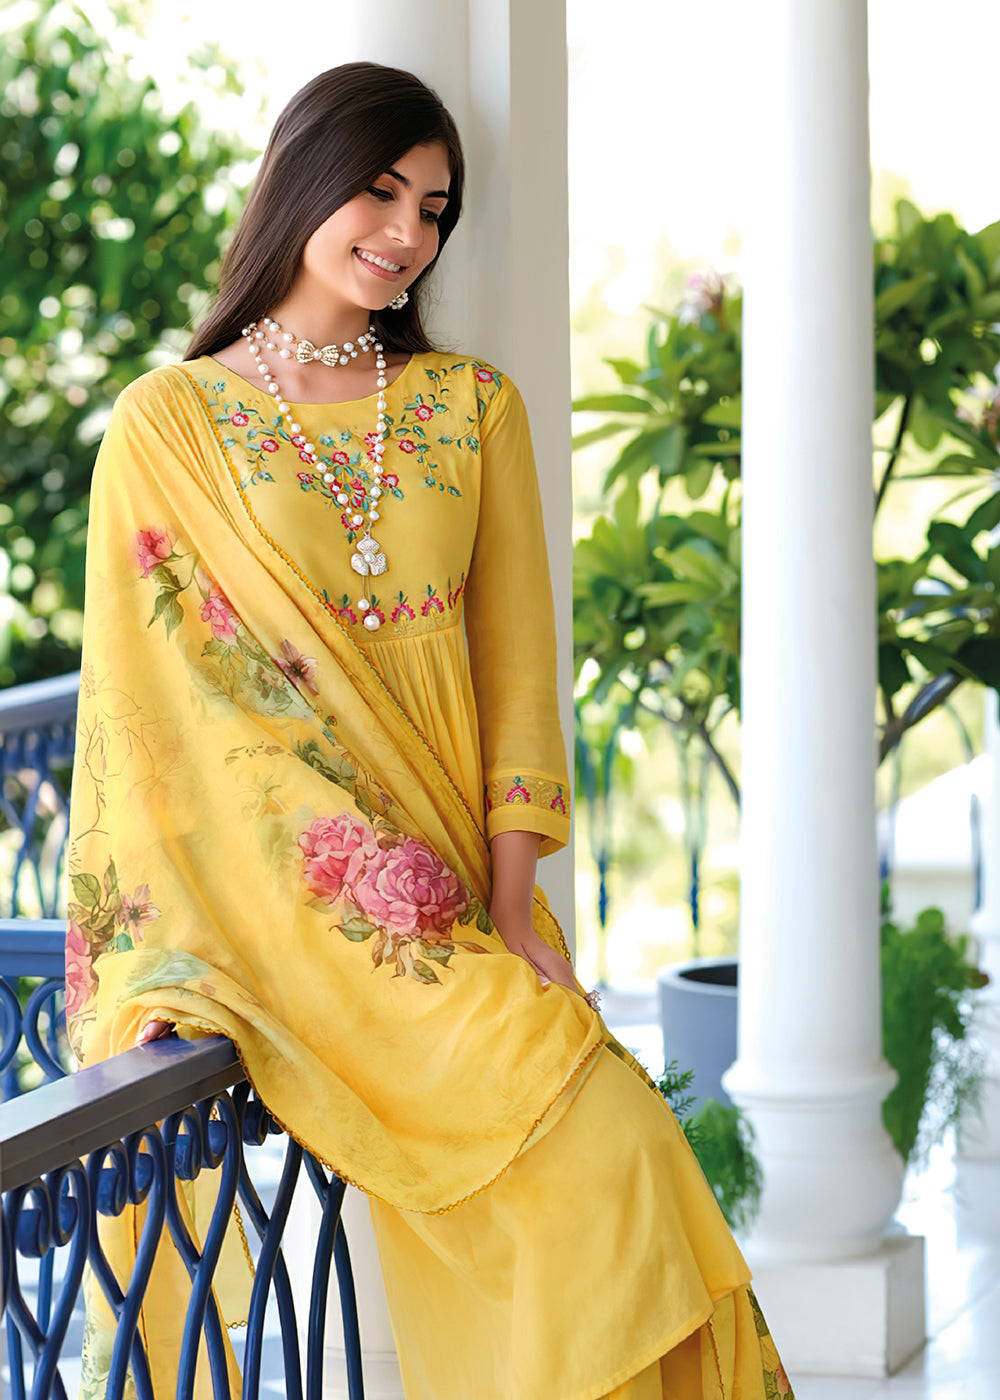 Buy Now Graceful Yellow Mal Mal Cotton Salwar Suit Online in USA, UK, Canada, Germany, Australia & Worldwide at Empress Clothing.